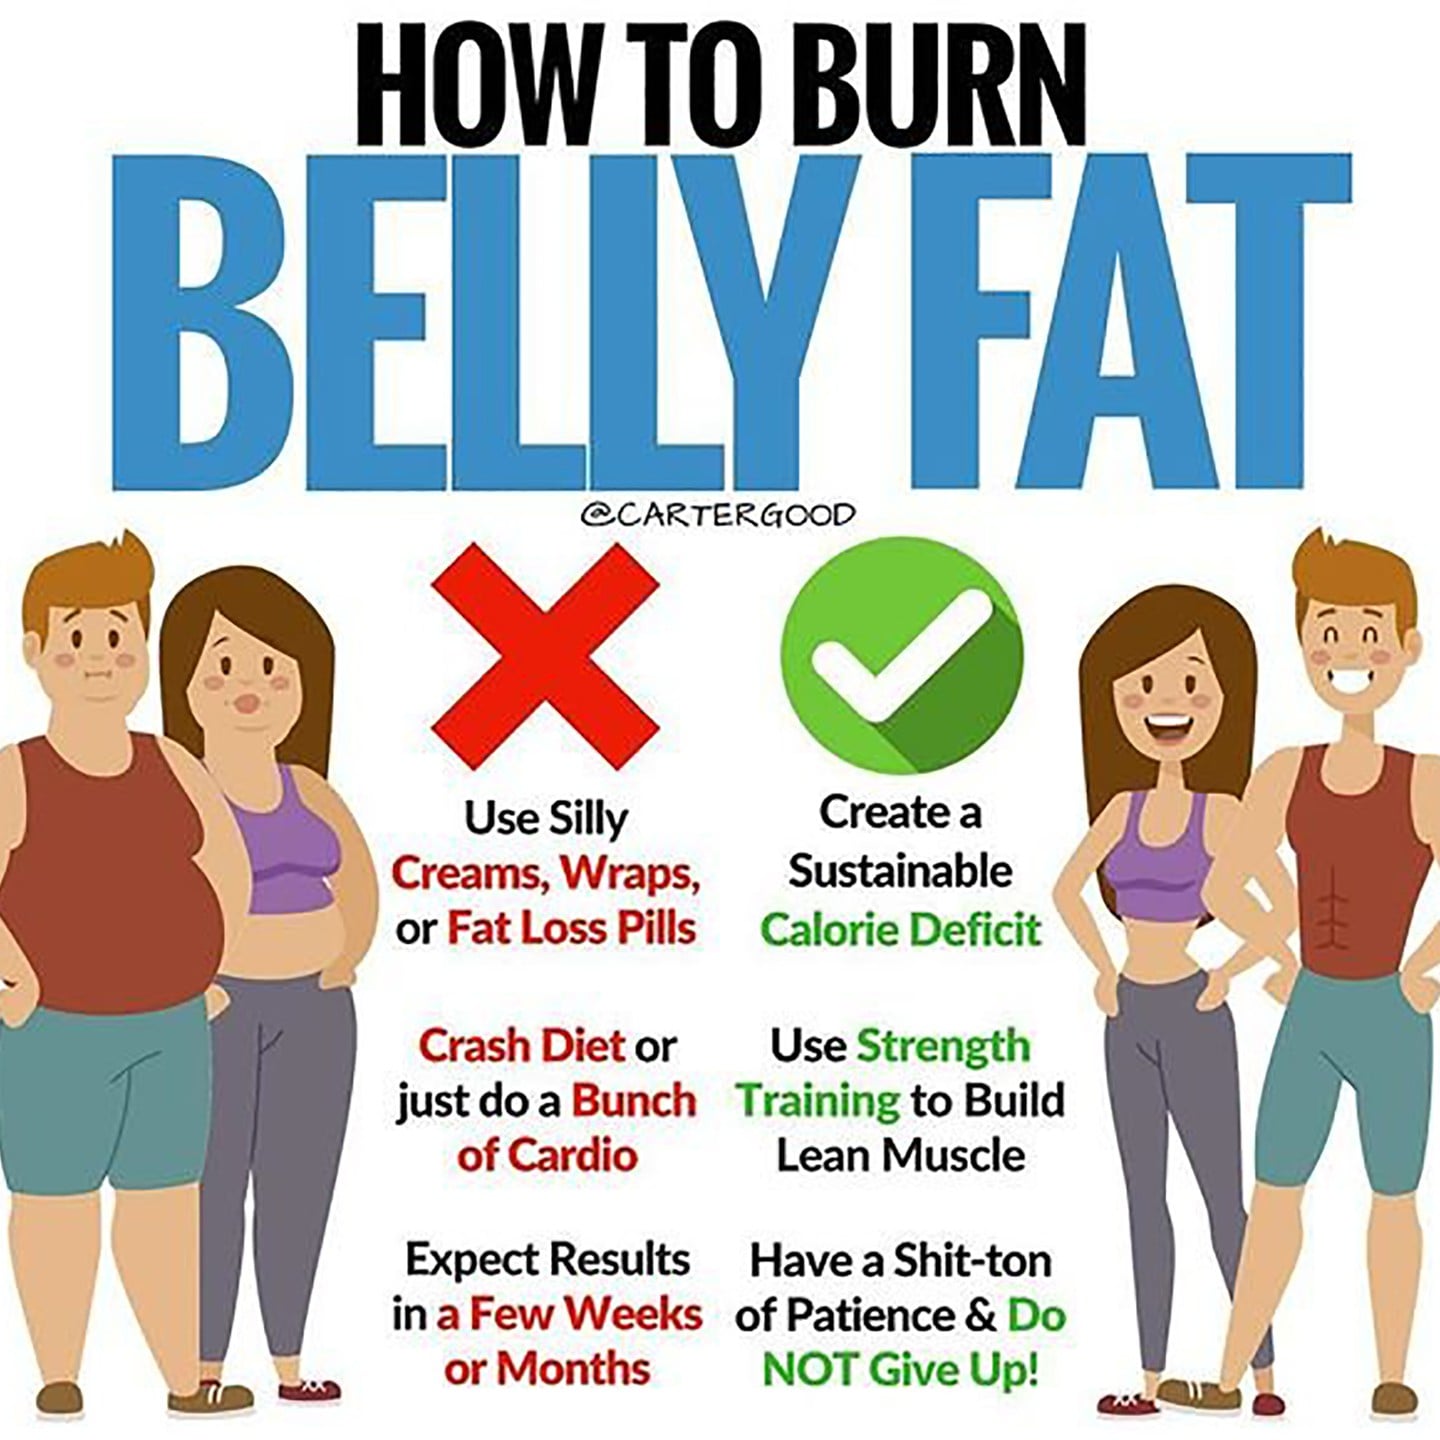 How to Burn Belly Fat.